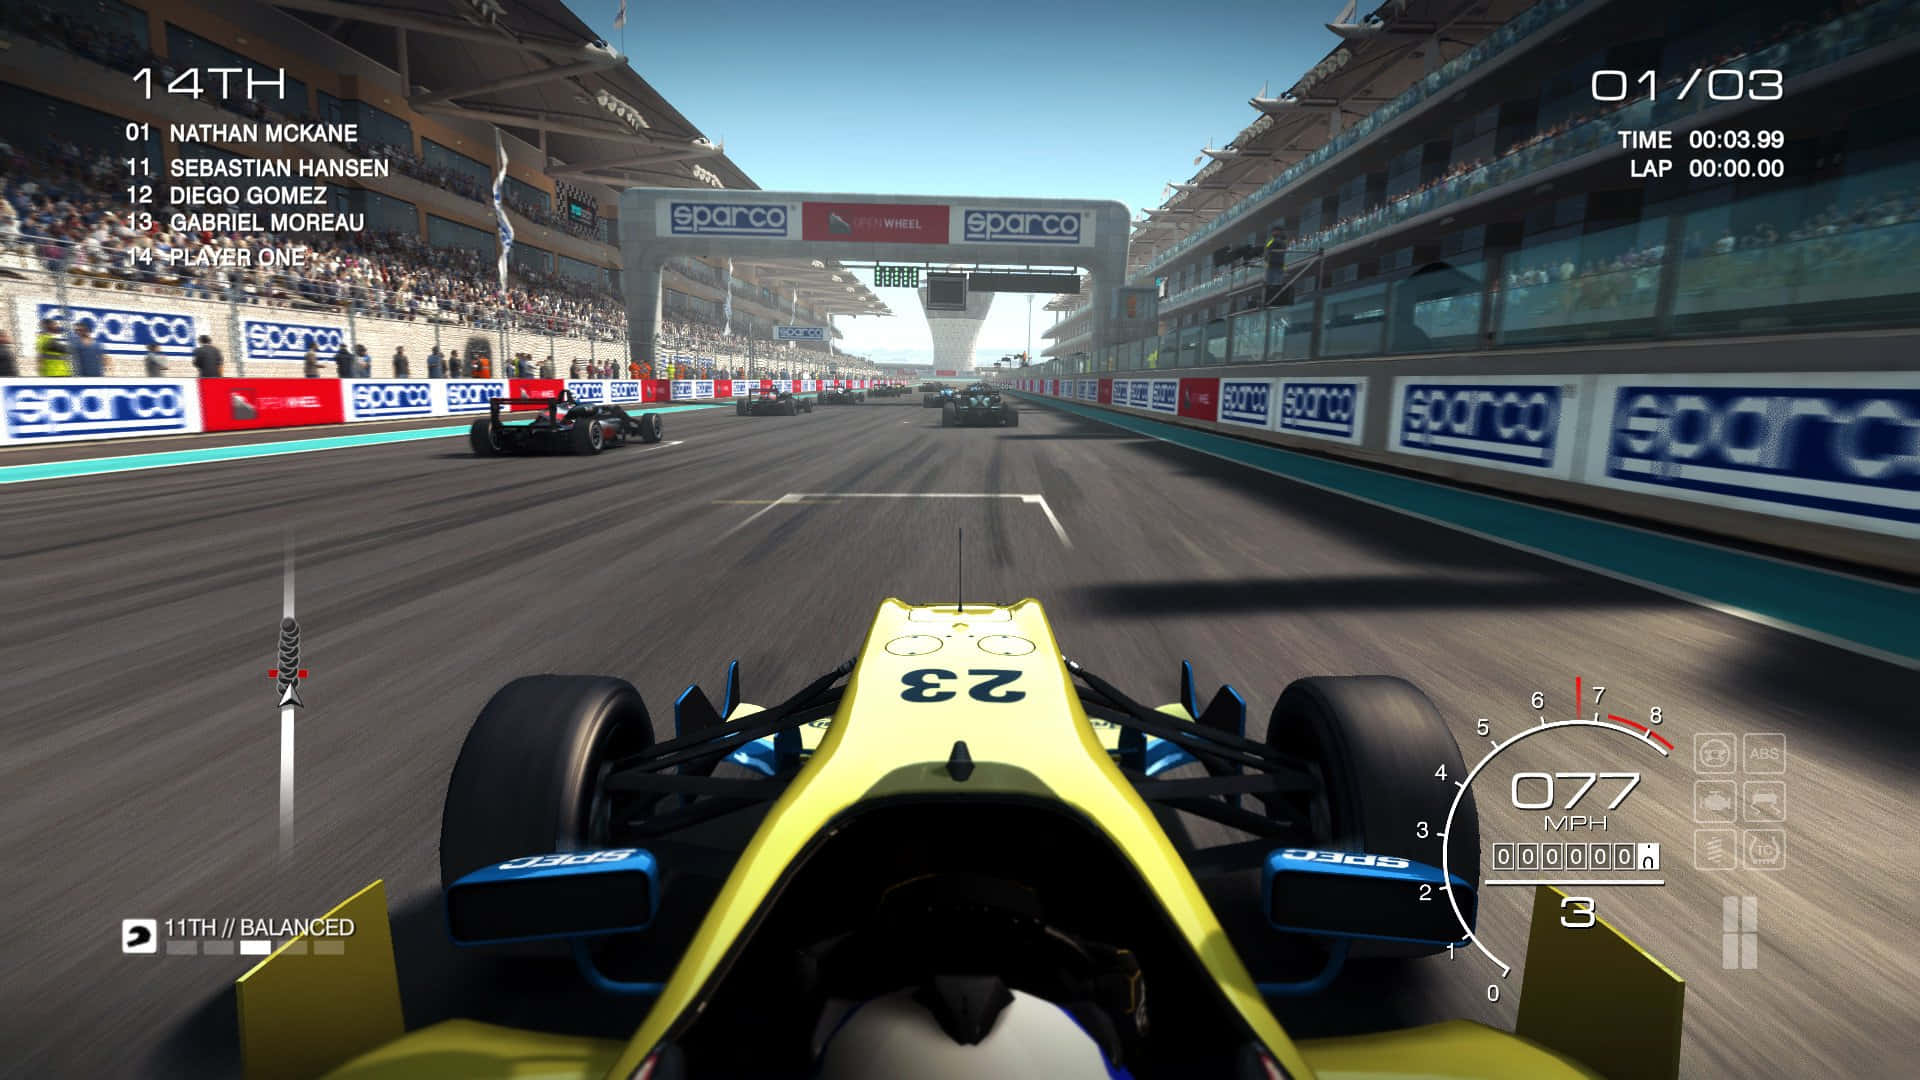 A Racing Game With A Car Driving Down The Track